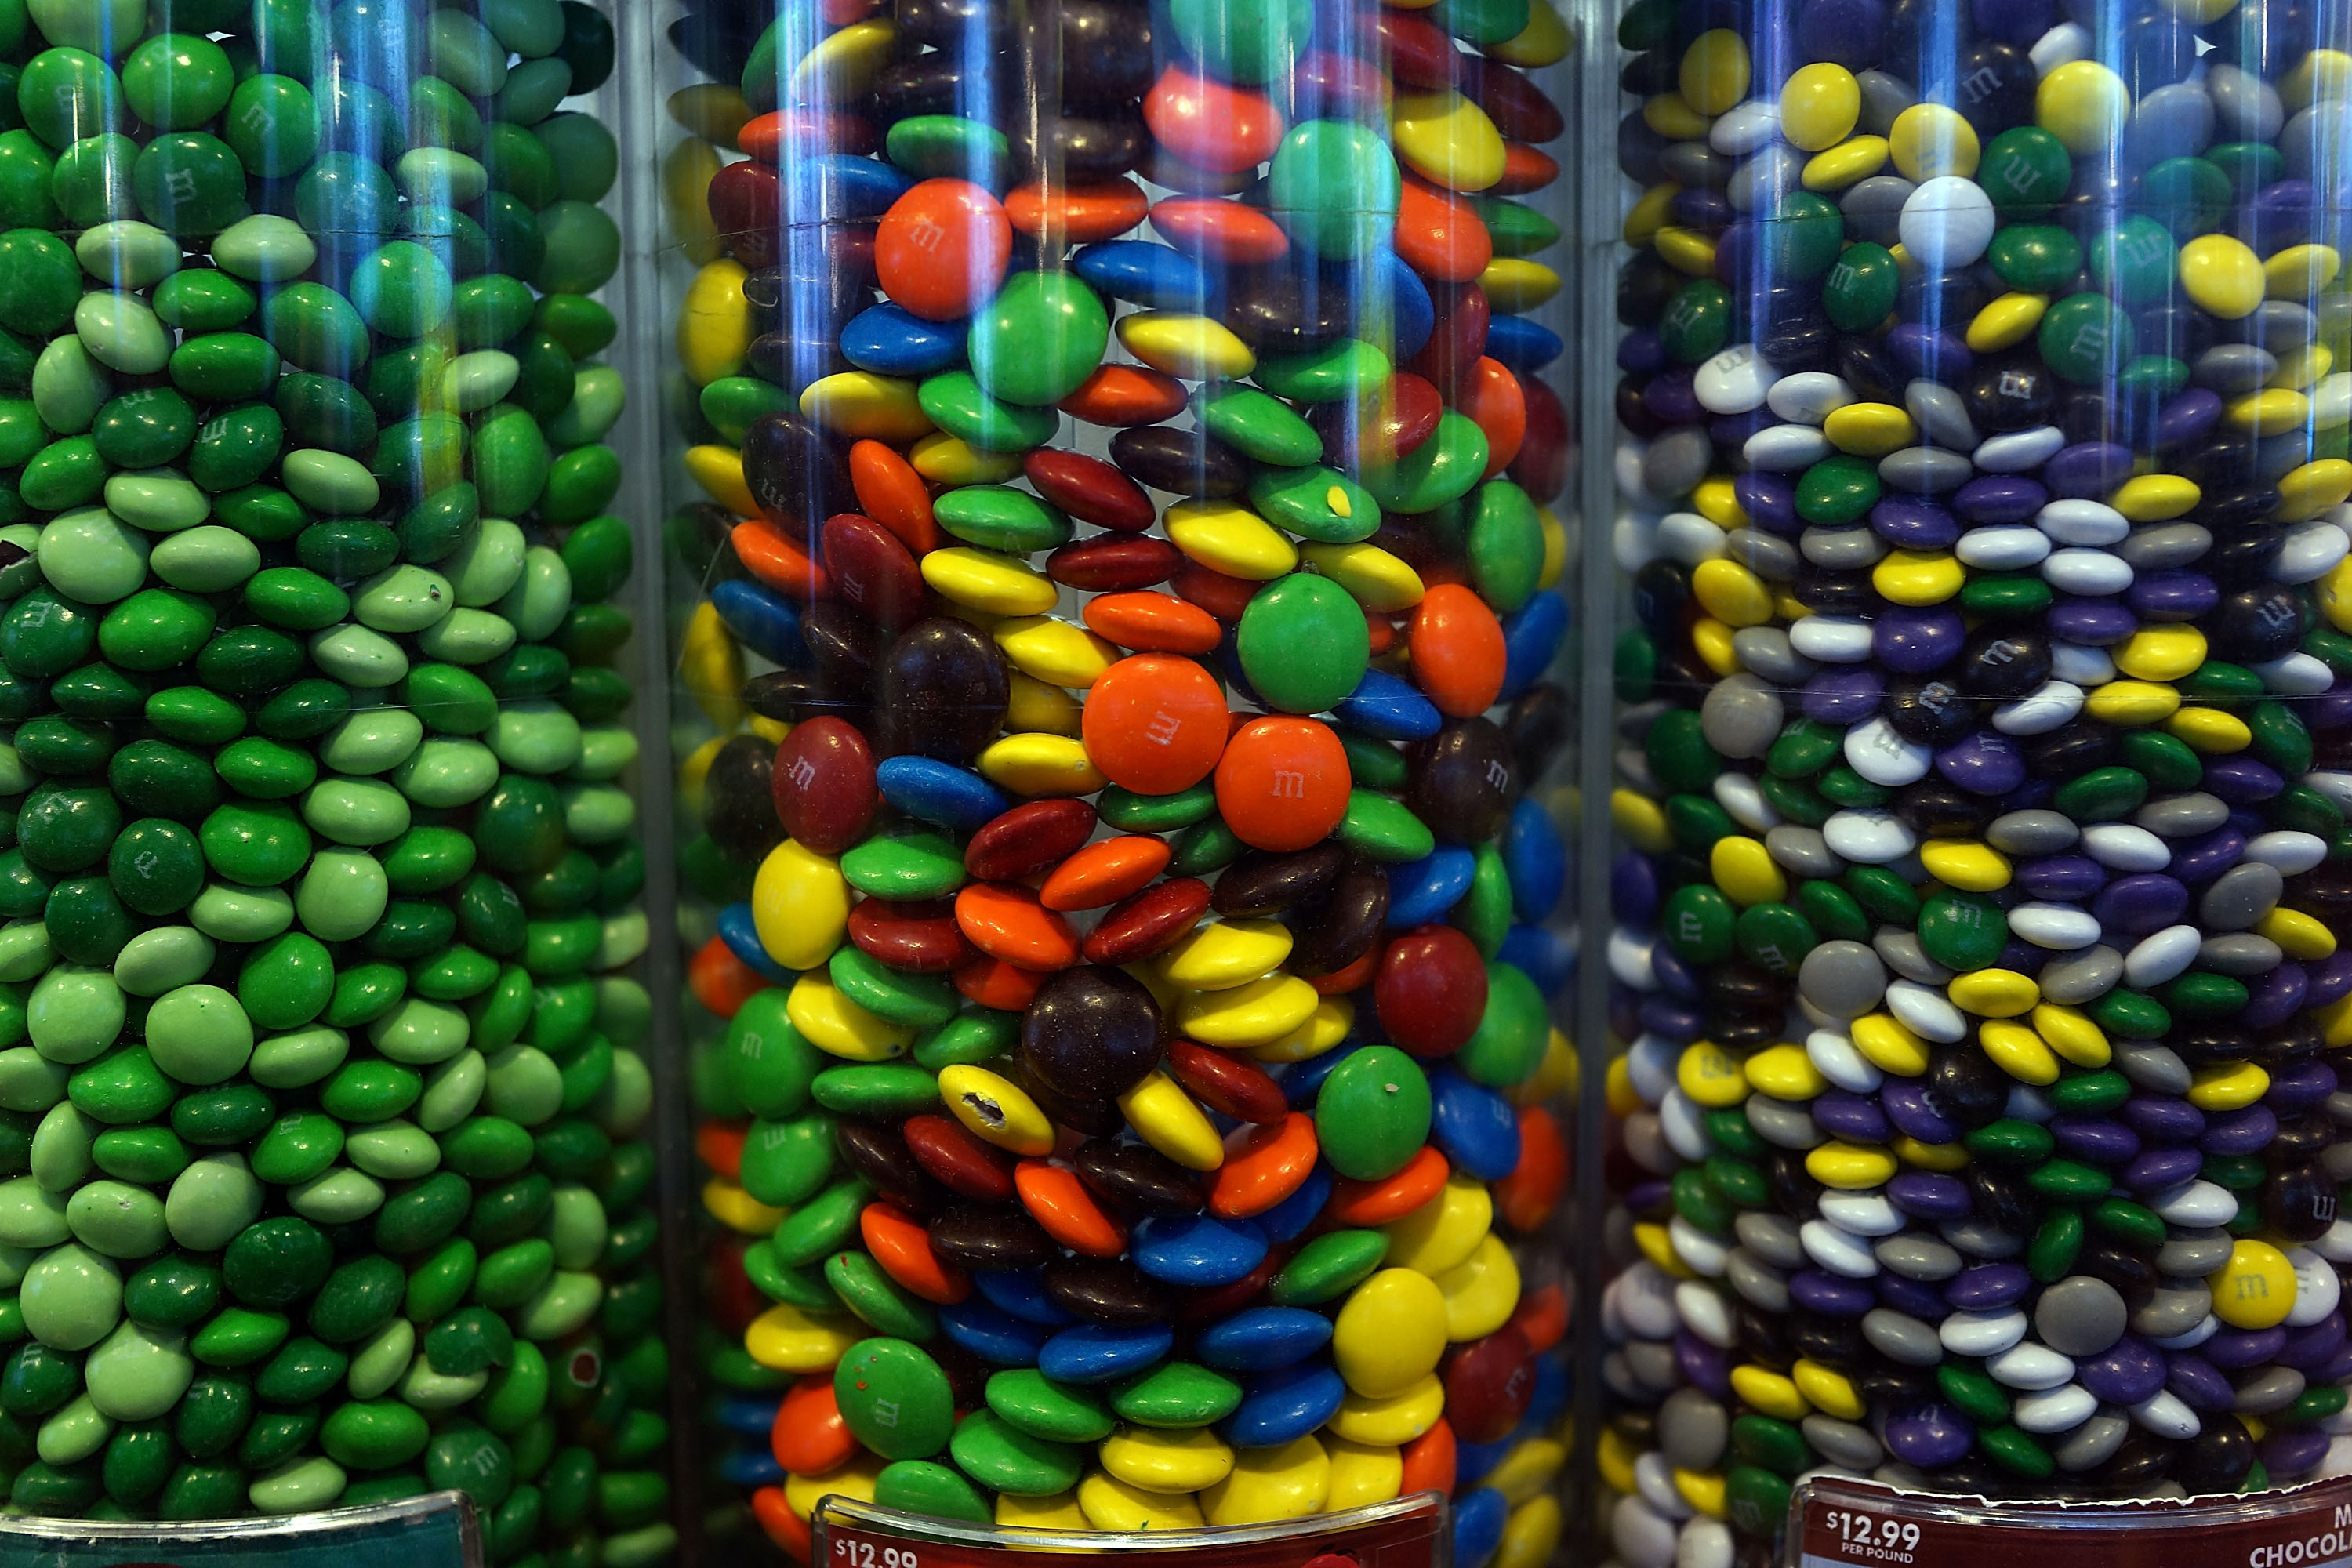 World Record for Stacking M&M's Beaten for Third Time in 15 Months